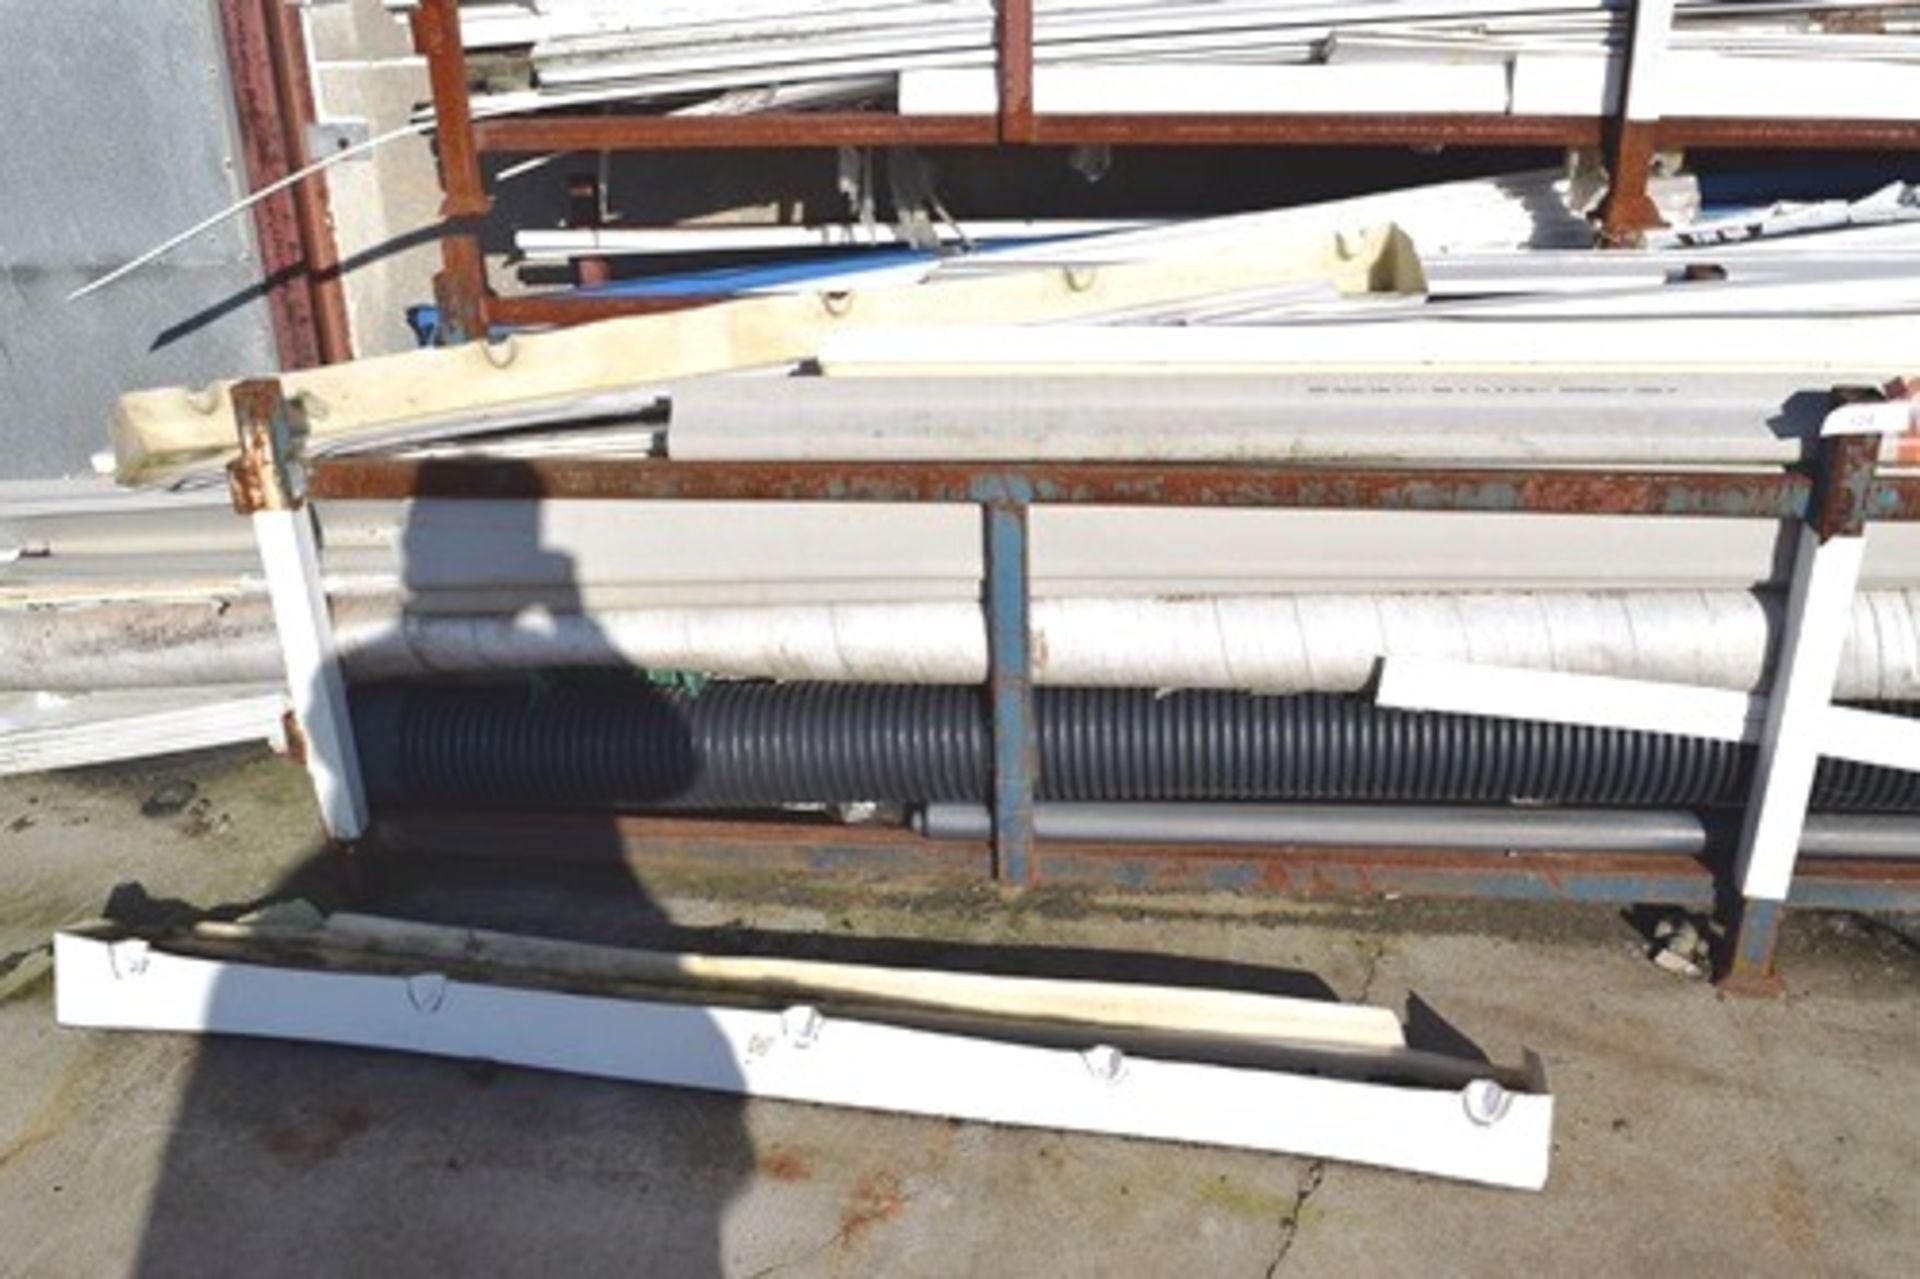 Assorted modern plastic profiles, pipe, facia's etc - open store (yard rear) - Image 8 of 13